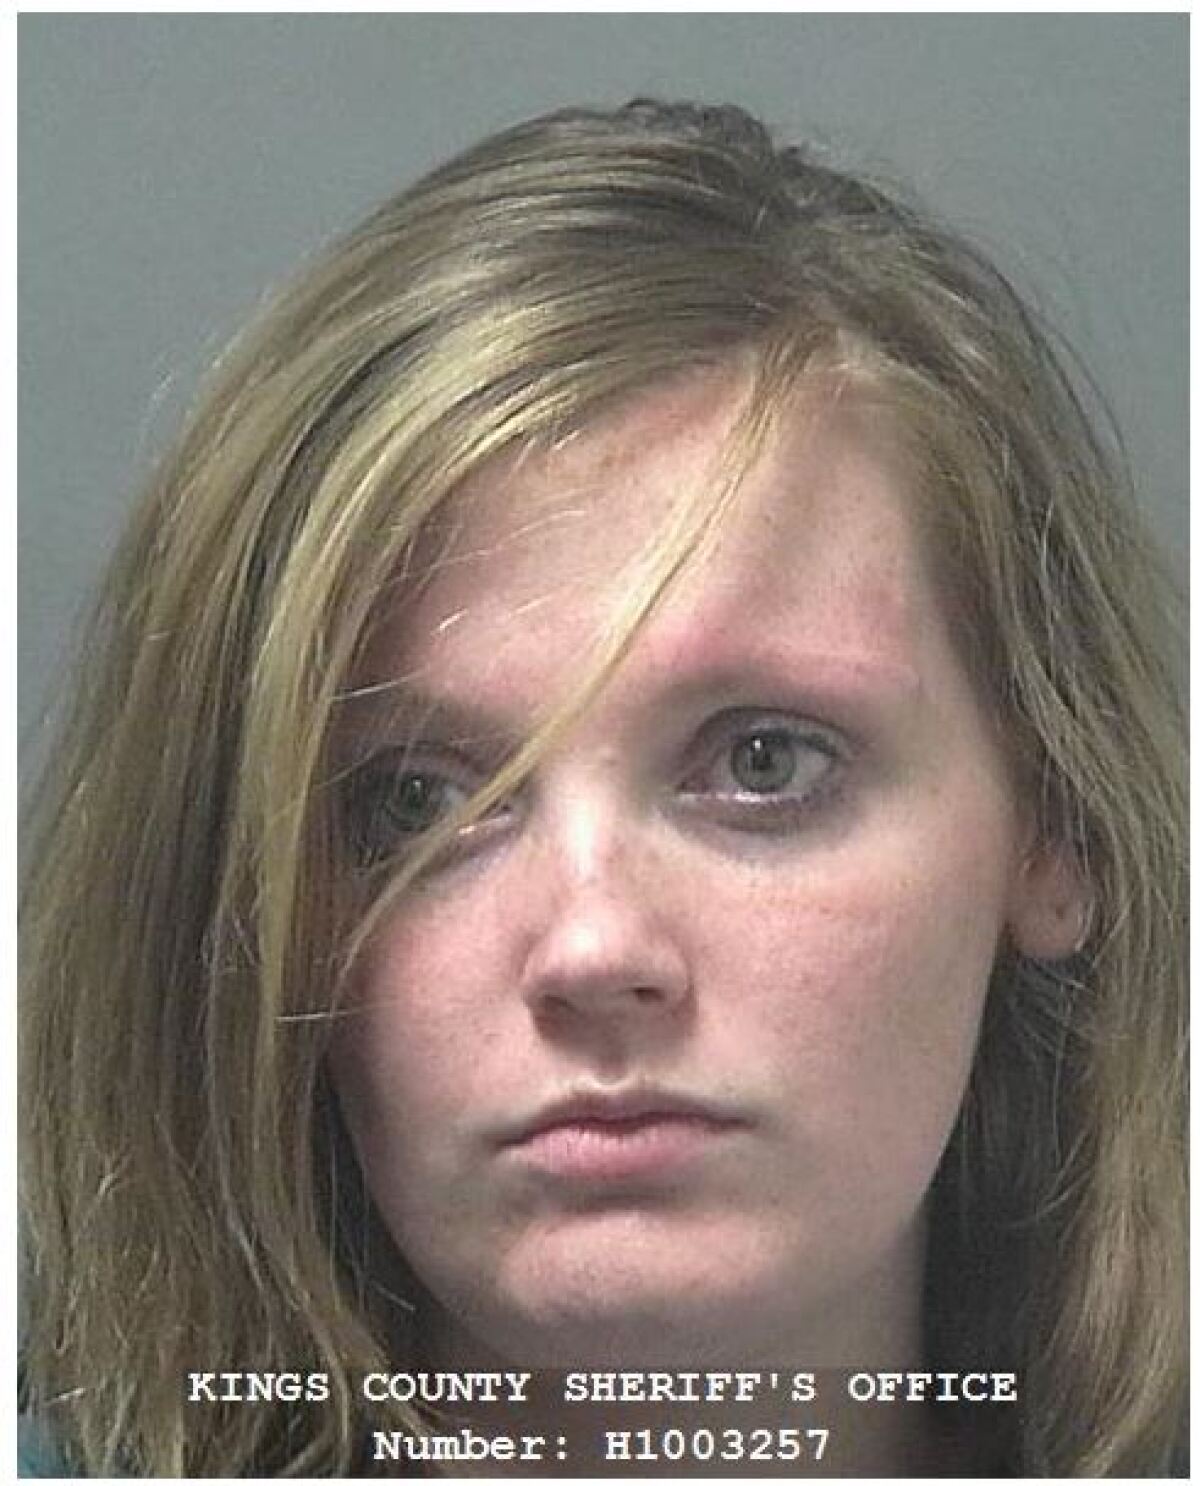 Chelsea Becker, 25, has been charged with murder after giving birth to a stillborn baby boy with toxic amounts of methamphetamine in his system.